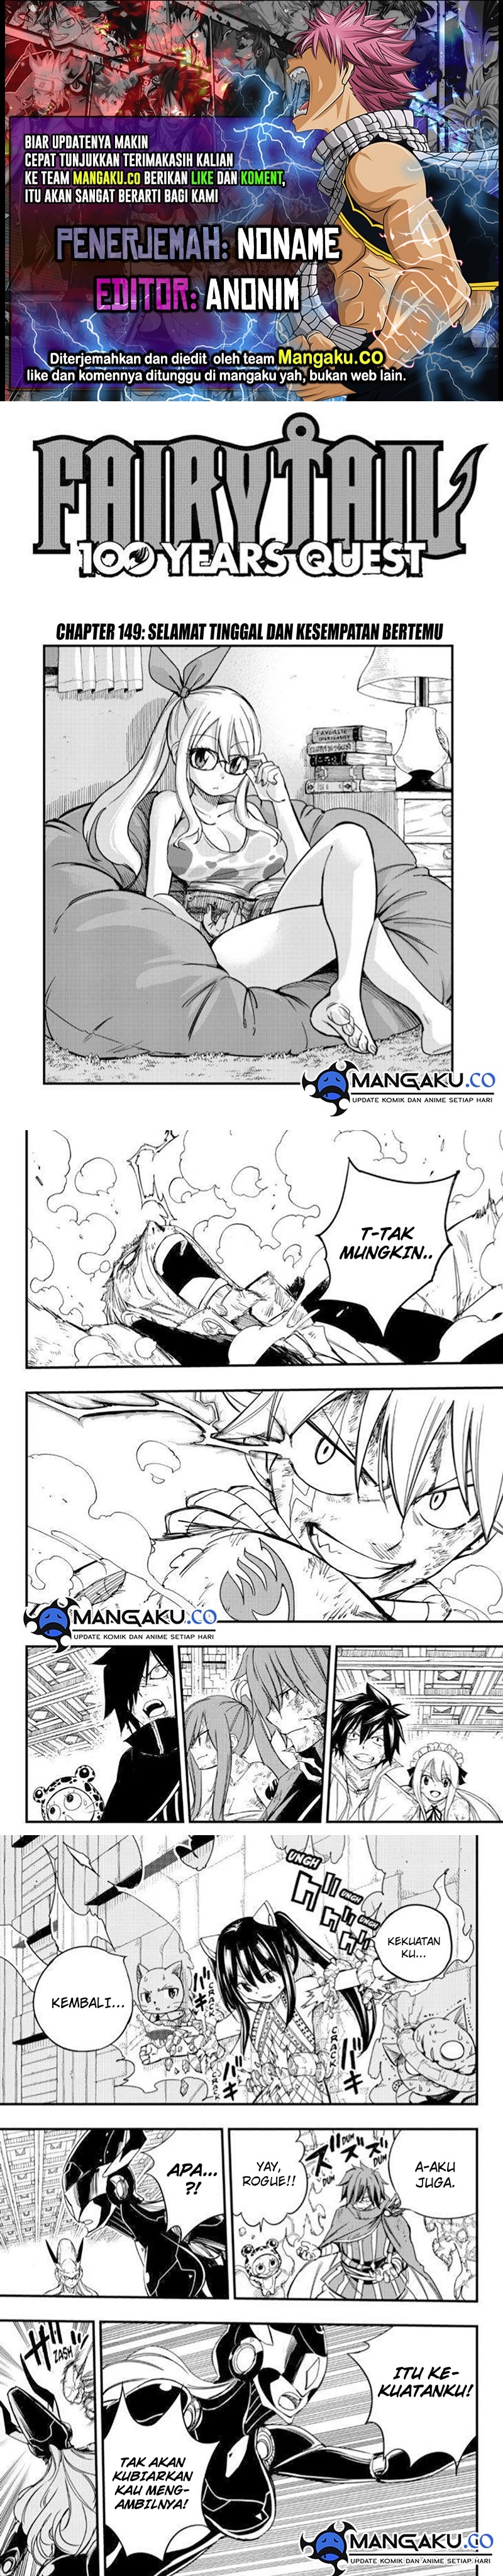 Fairy Tail: 100 Years Quest: Chapter 149 - Page 1